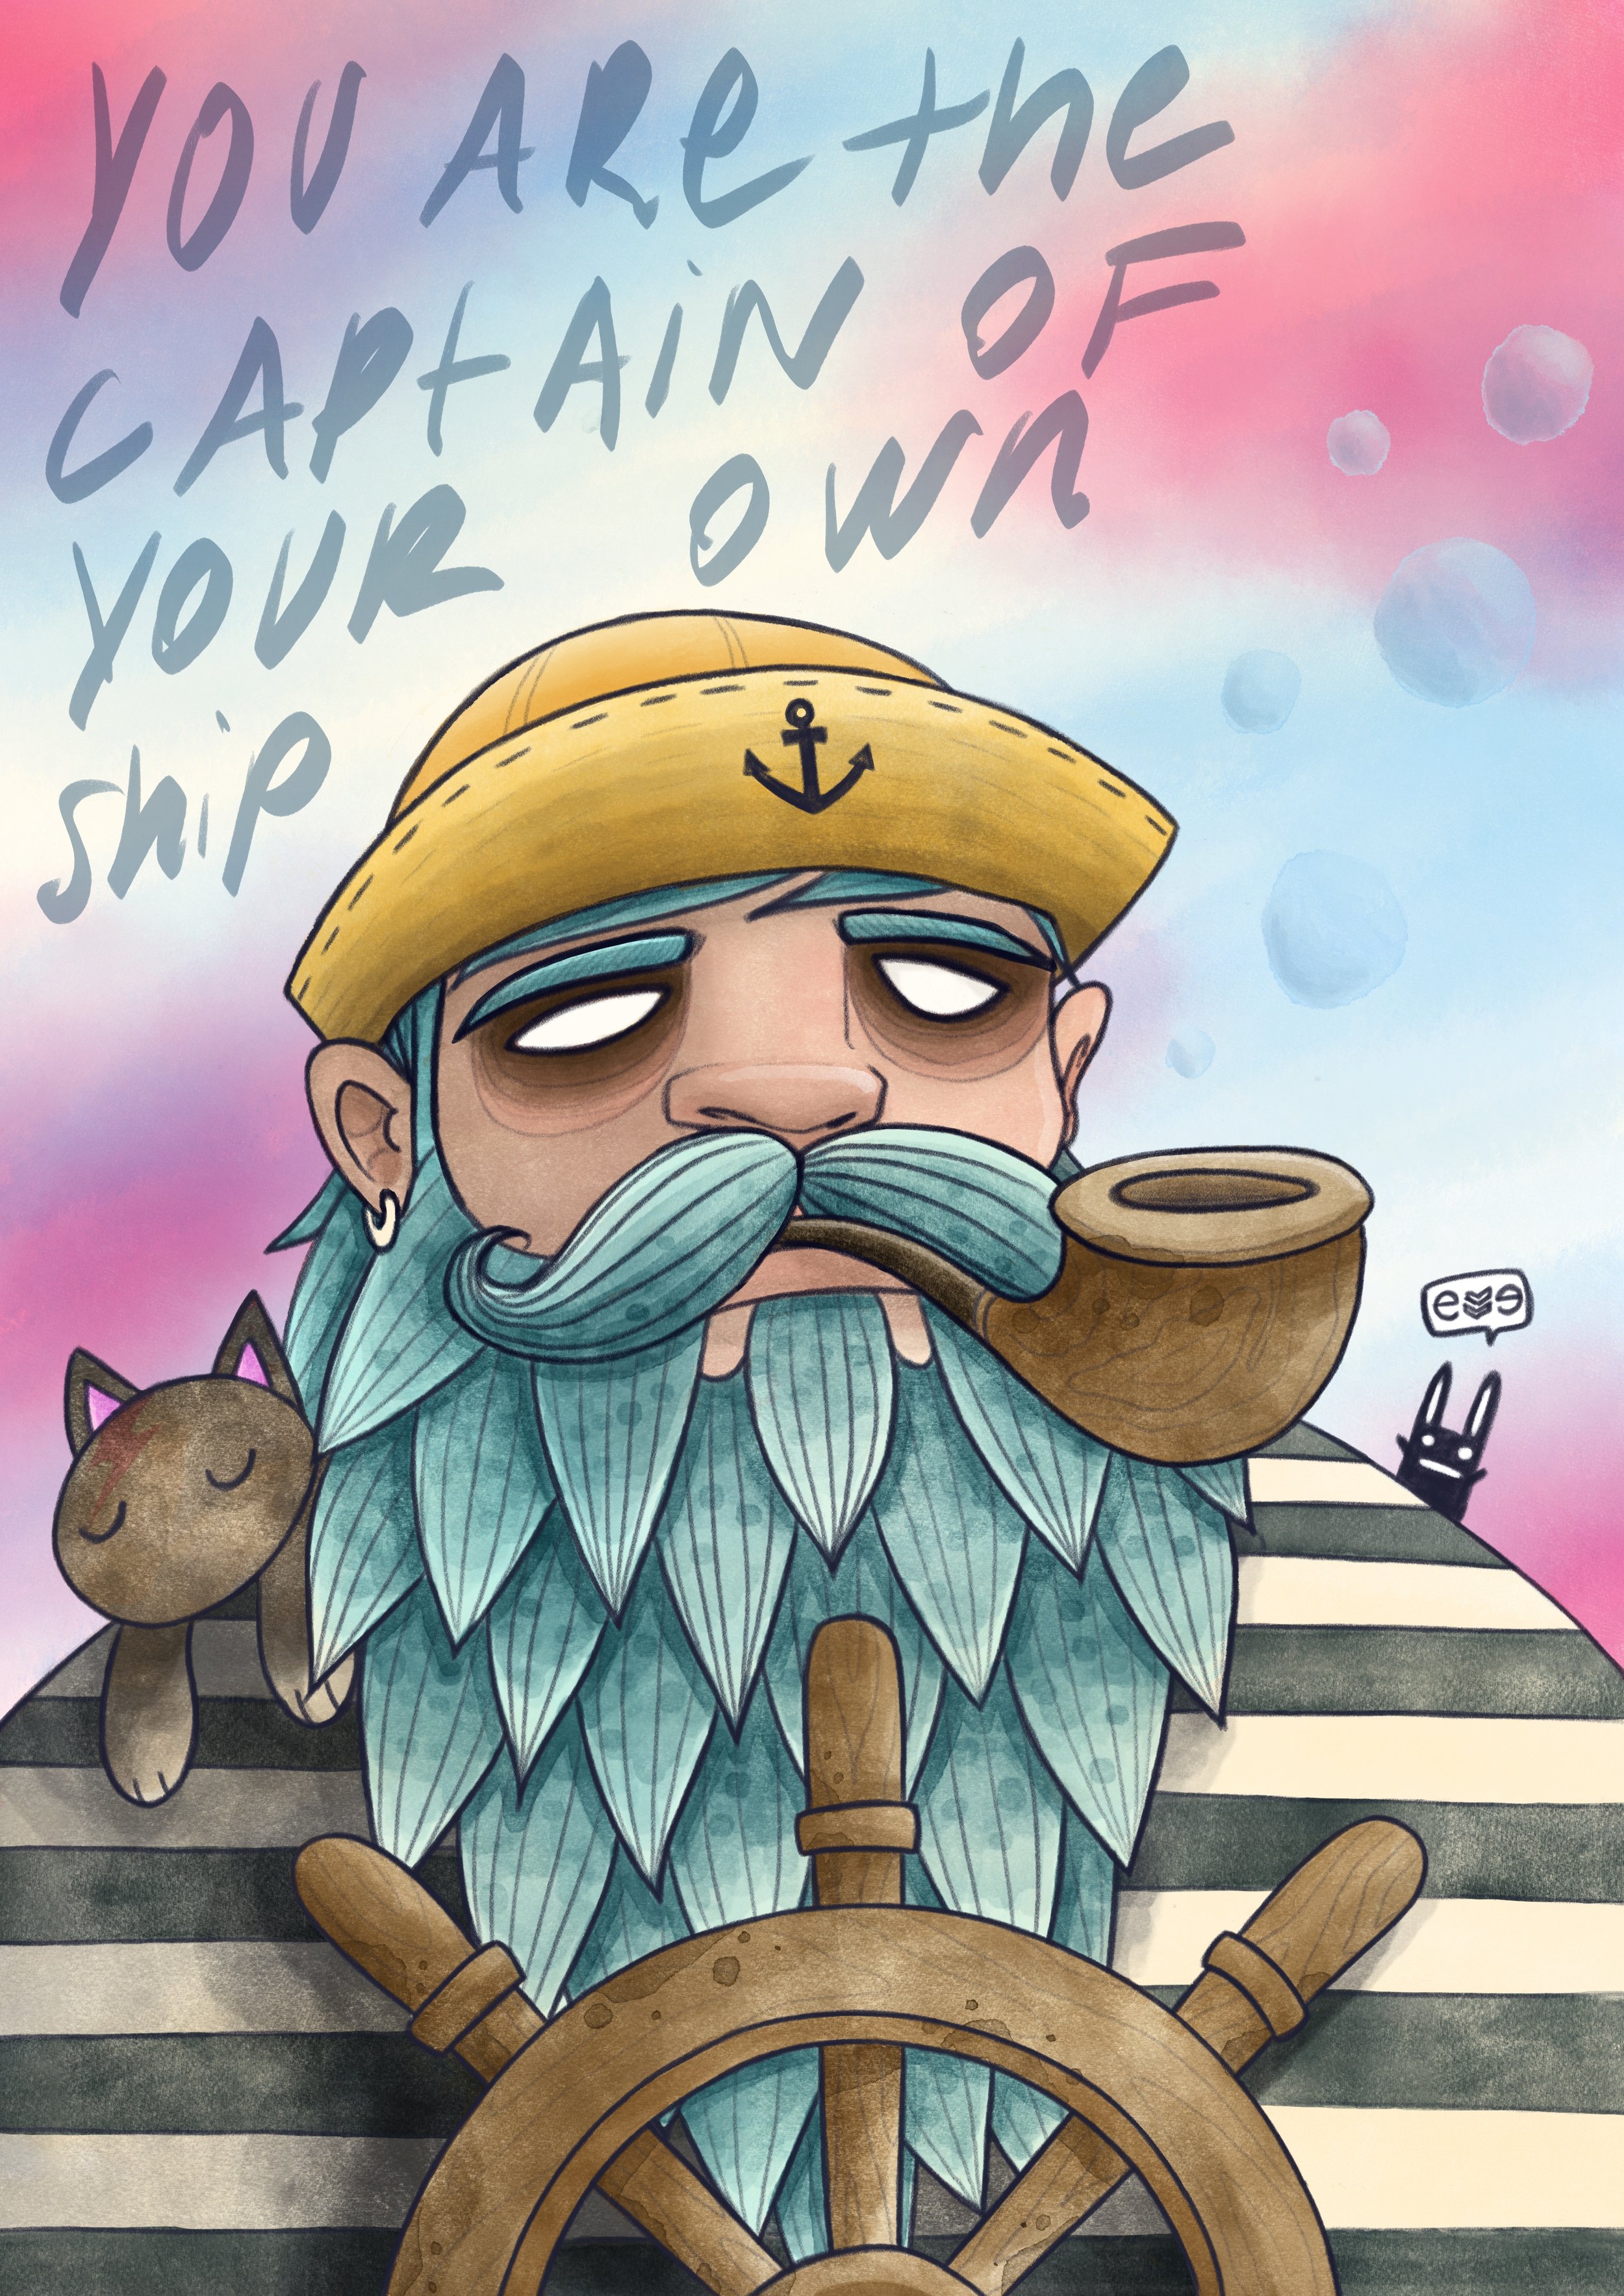 Captain Blue Beard - 'You are the captain of your own ship'